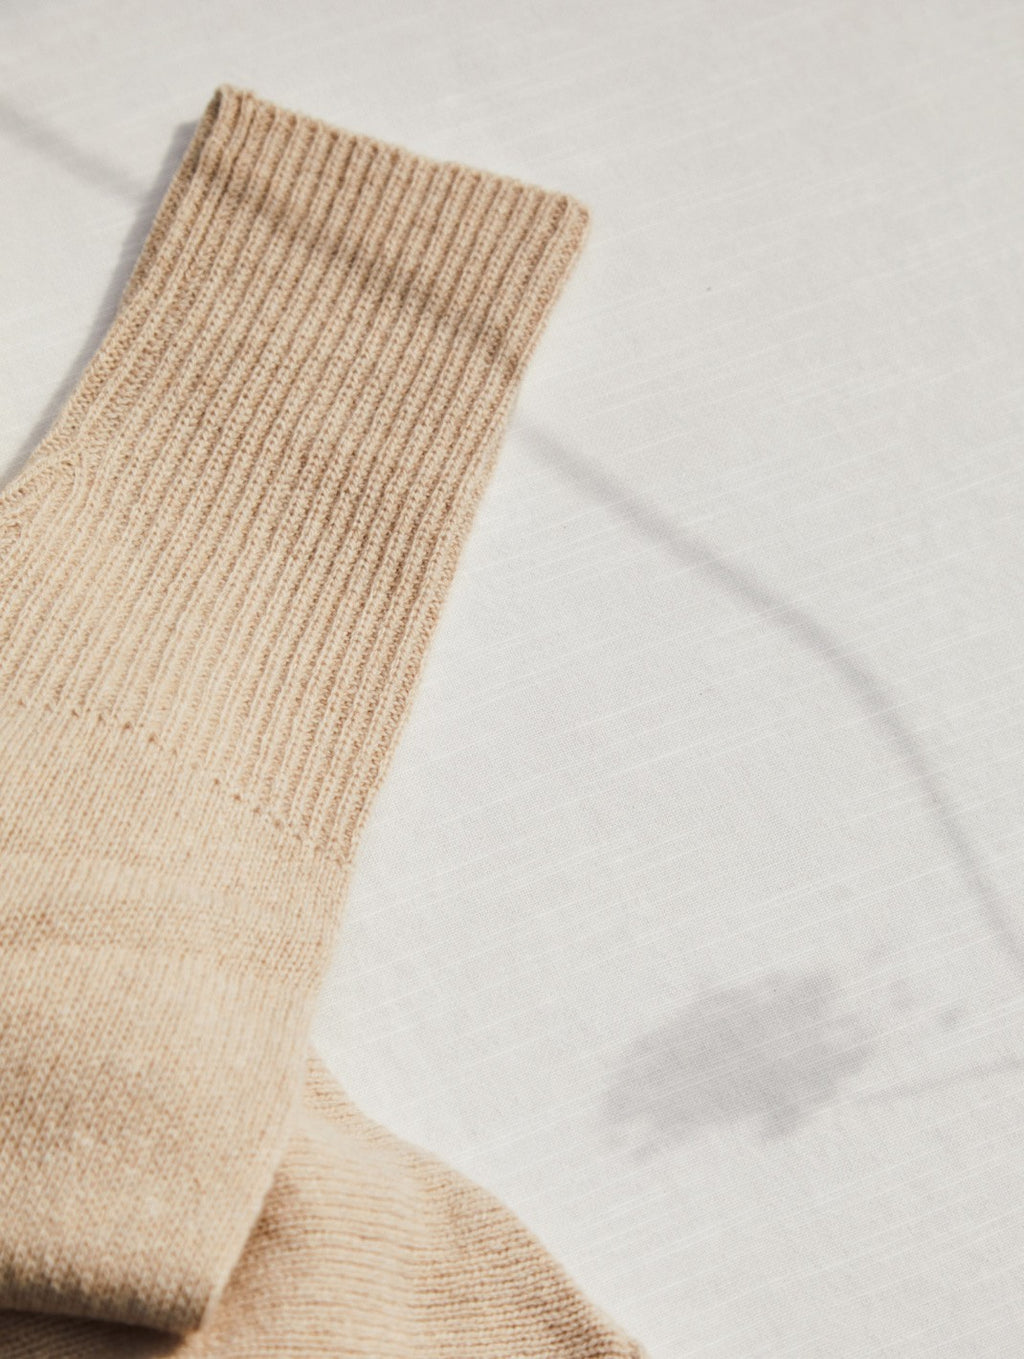 Close-up of a sock on a flat surface with shadows.